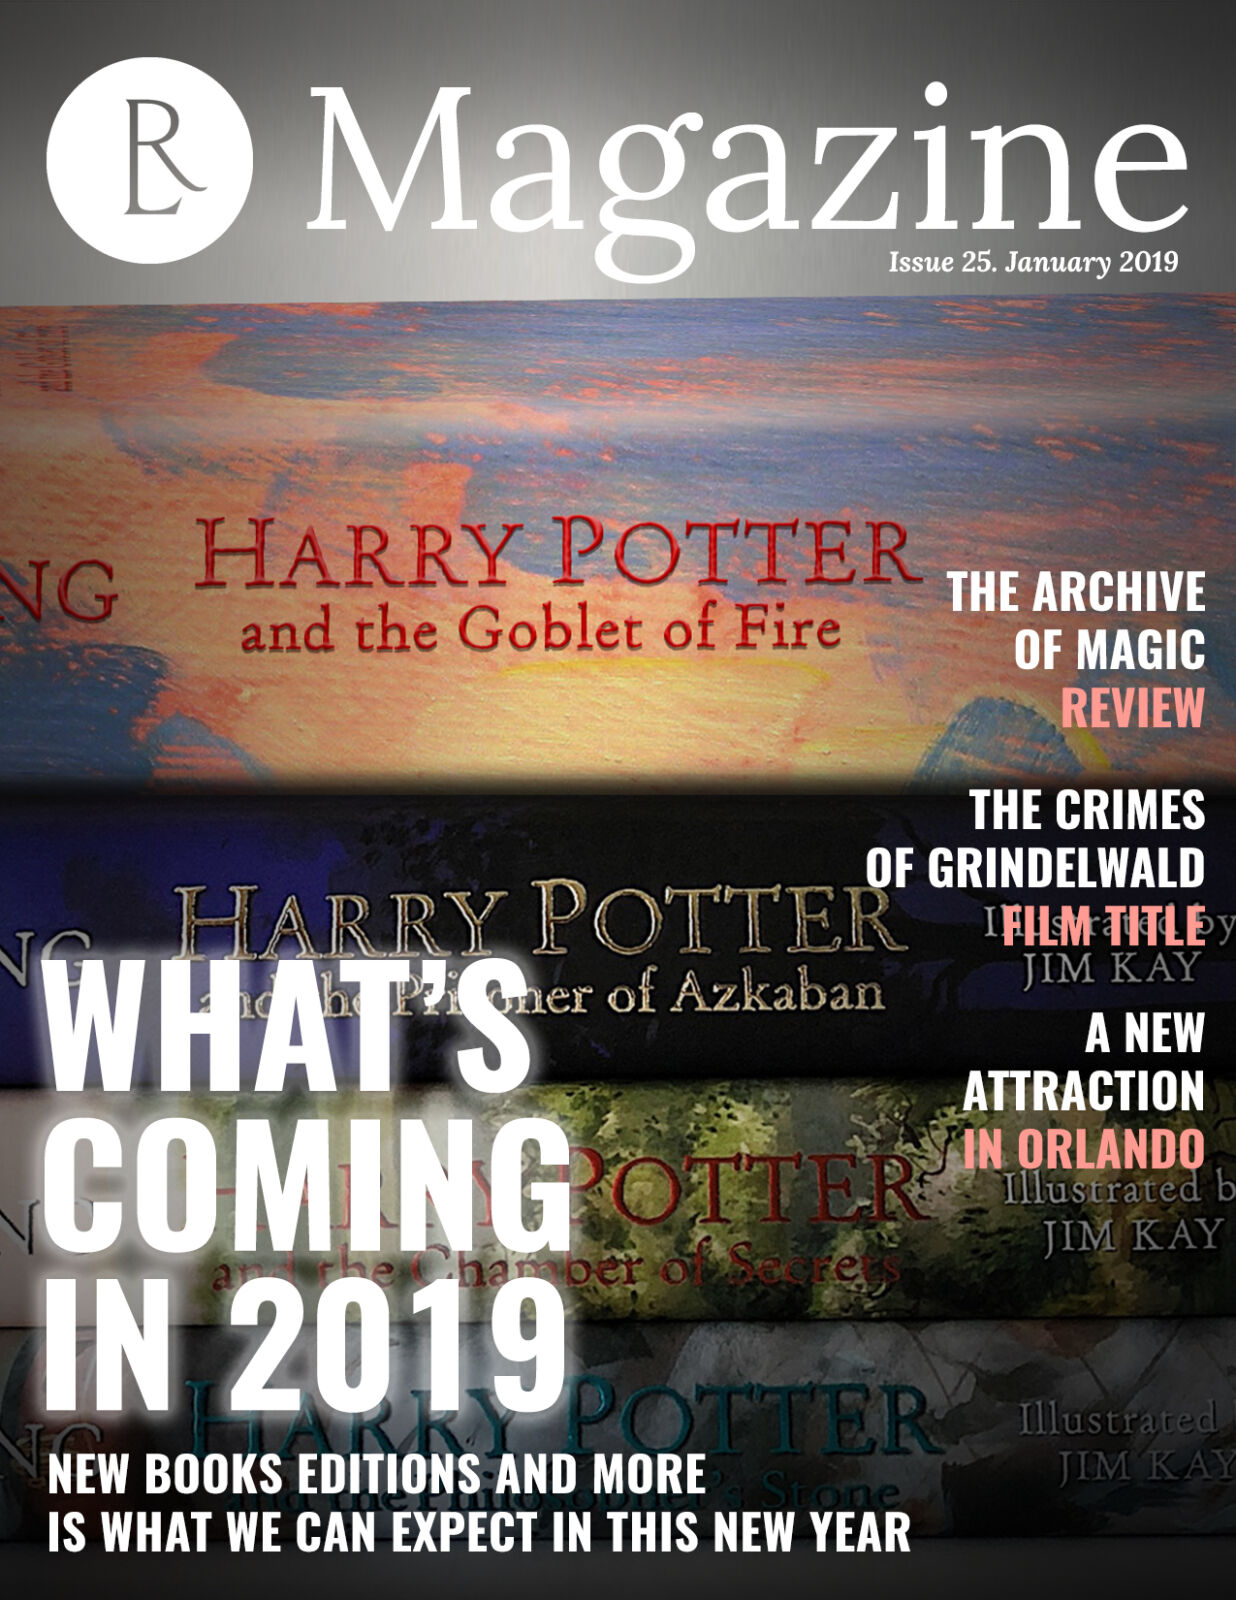 The Rowling Library Magazine #25 (January 2019): What's coming in 2019